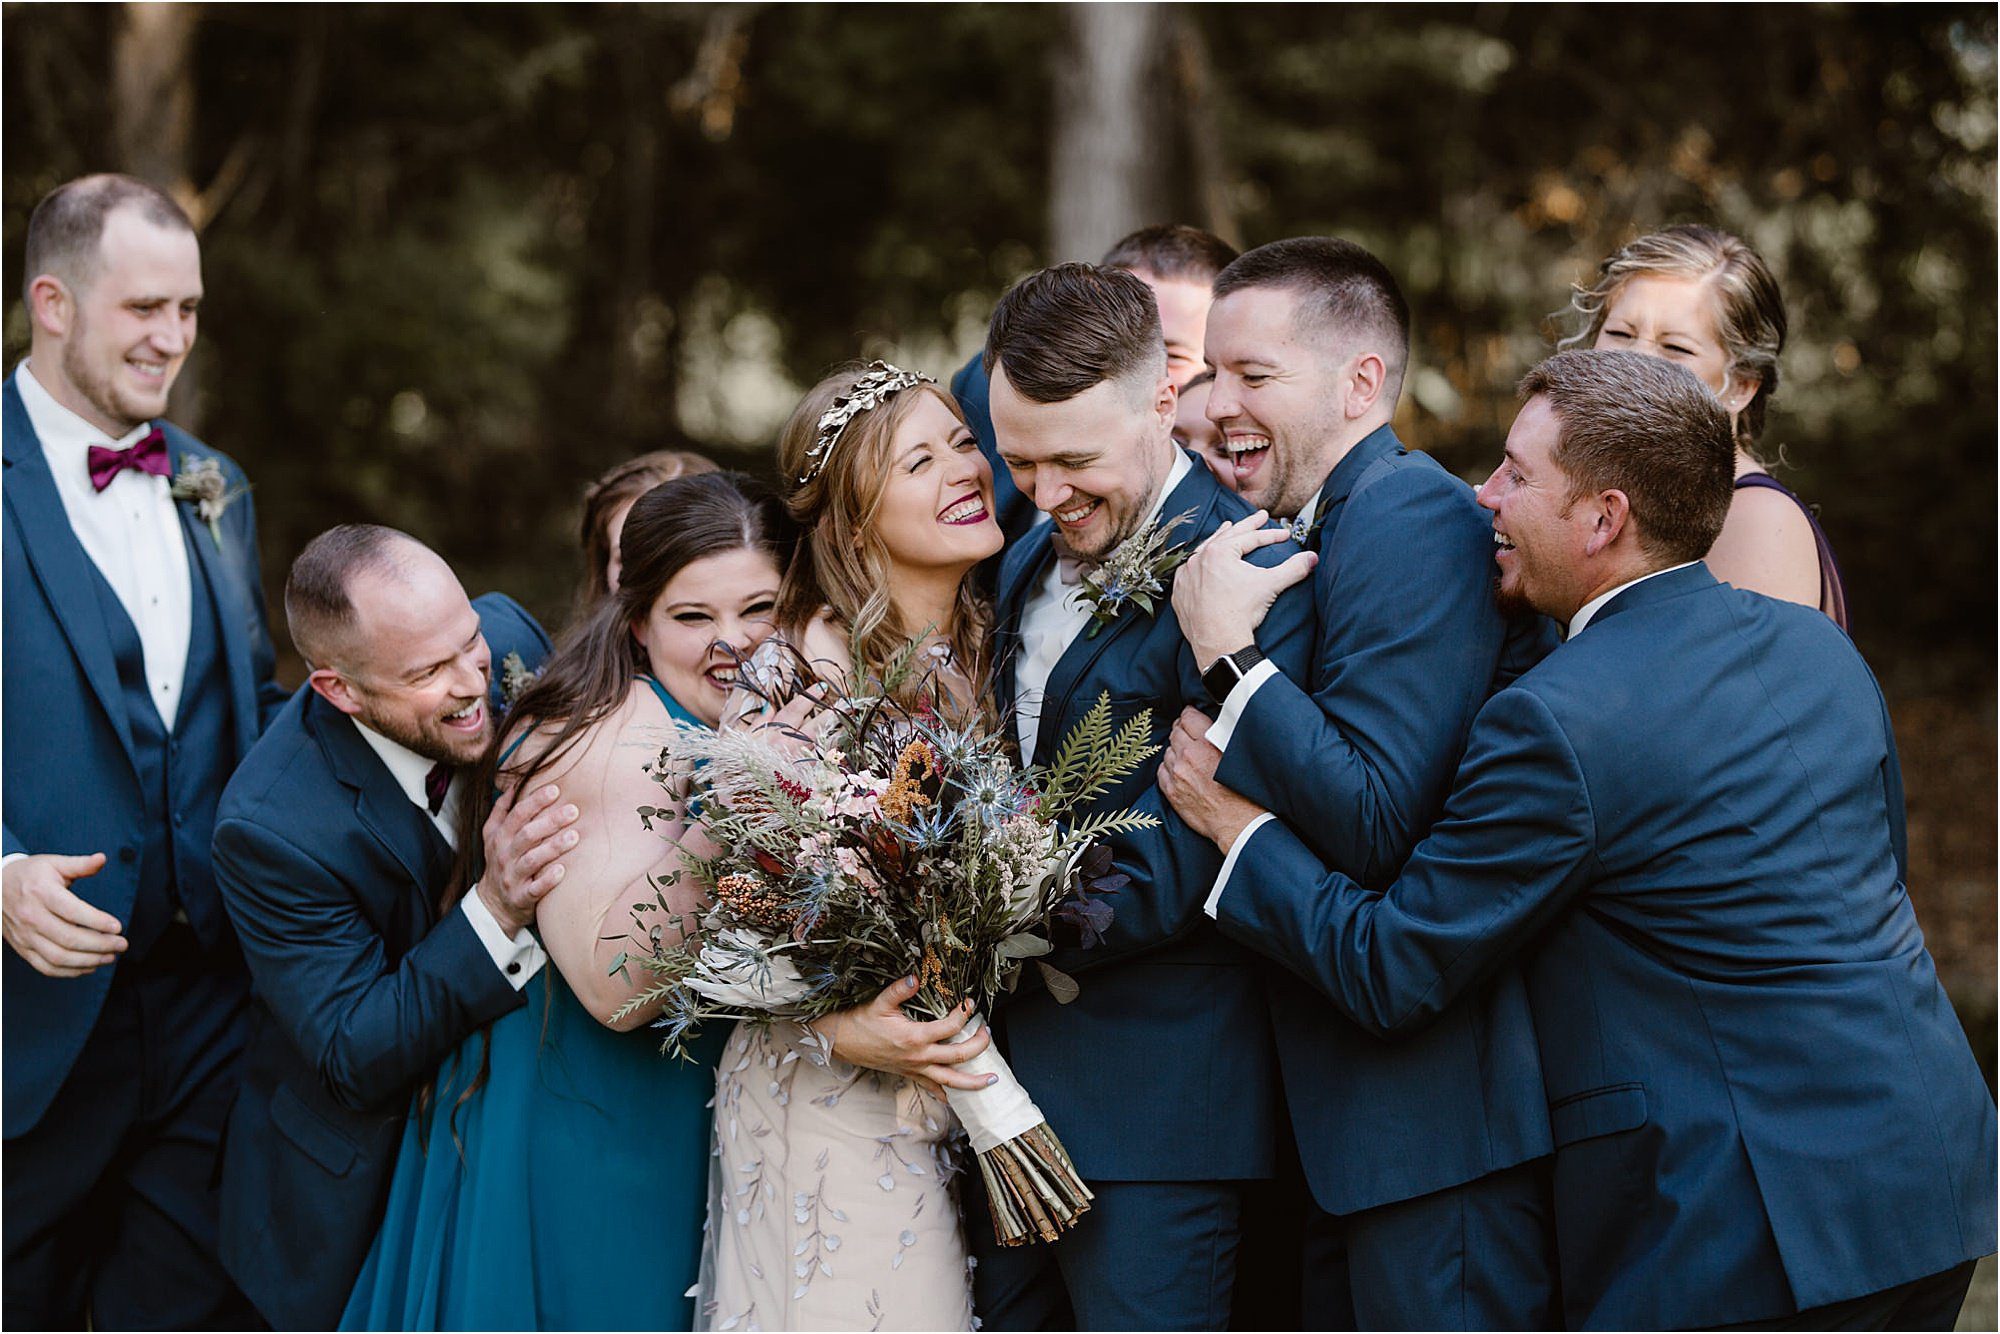 Jewel-Toned Wedding at Private Estatee